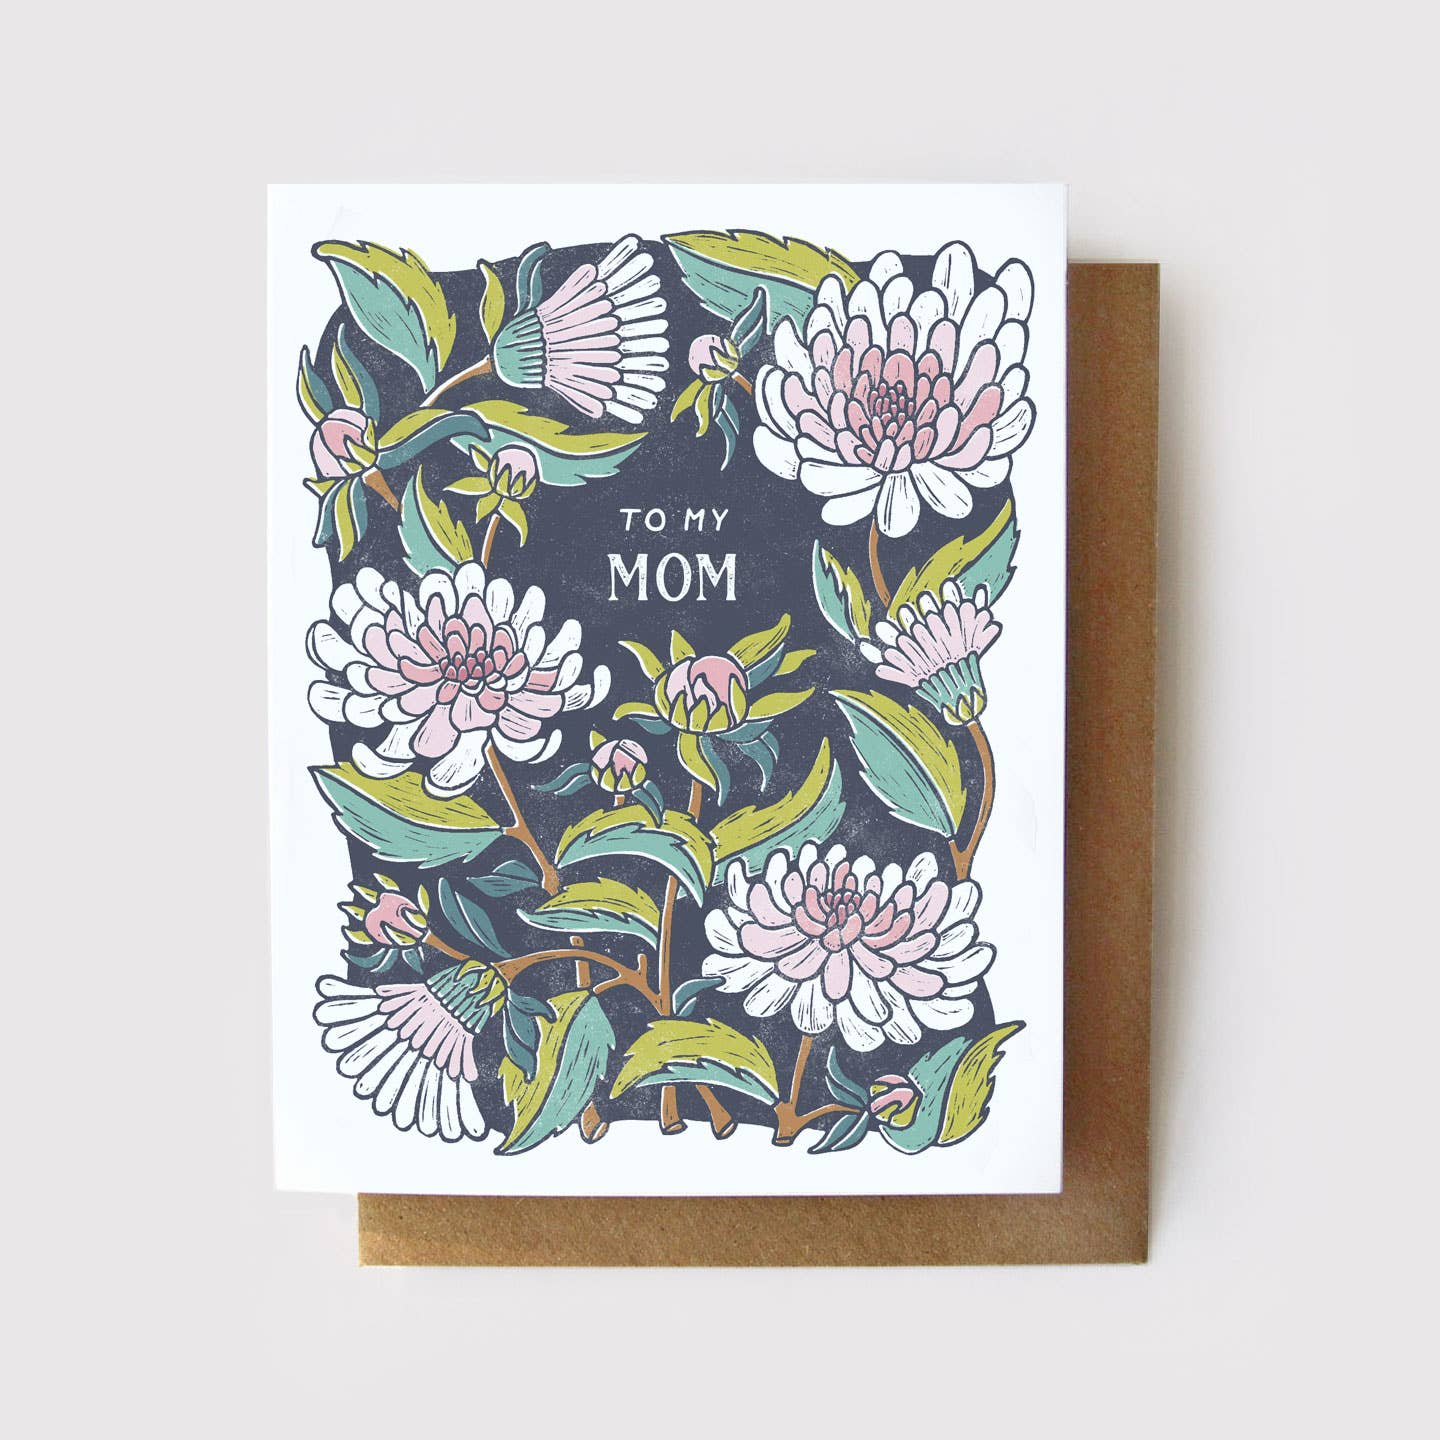 To My Mom - Dahlia Plastic Free Mother's Day Card